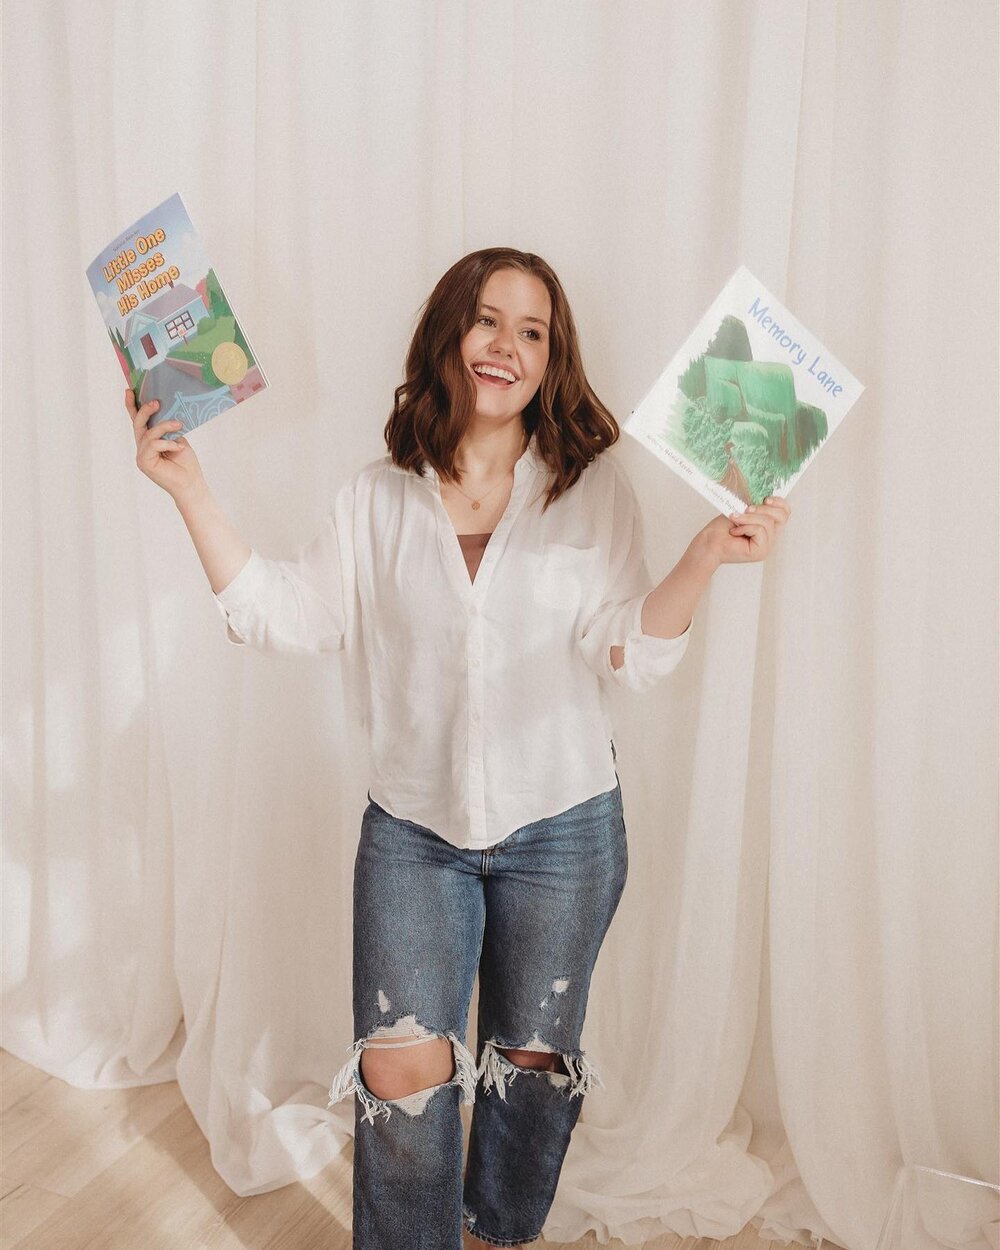 Meet Natalie - an author x2 📖📖

The first time I worked with Natalie was for her headshots that are in her new book (swipe to see). She recently wrote her second book and came to me for author branding photos. We wanted to highlight the launch of h